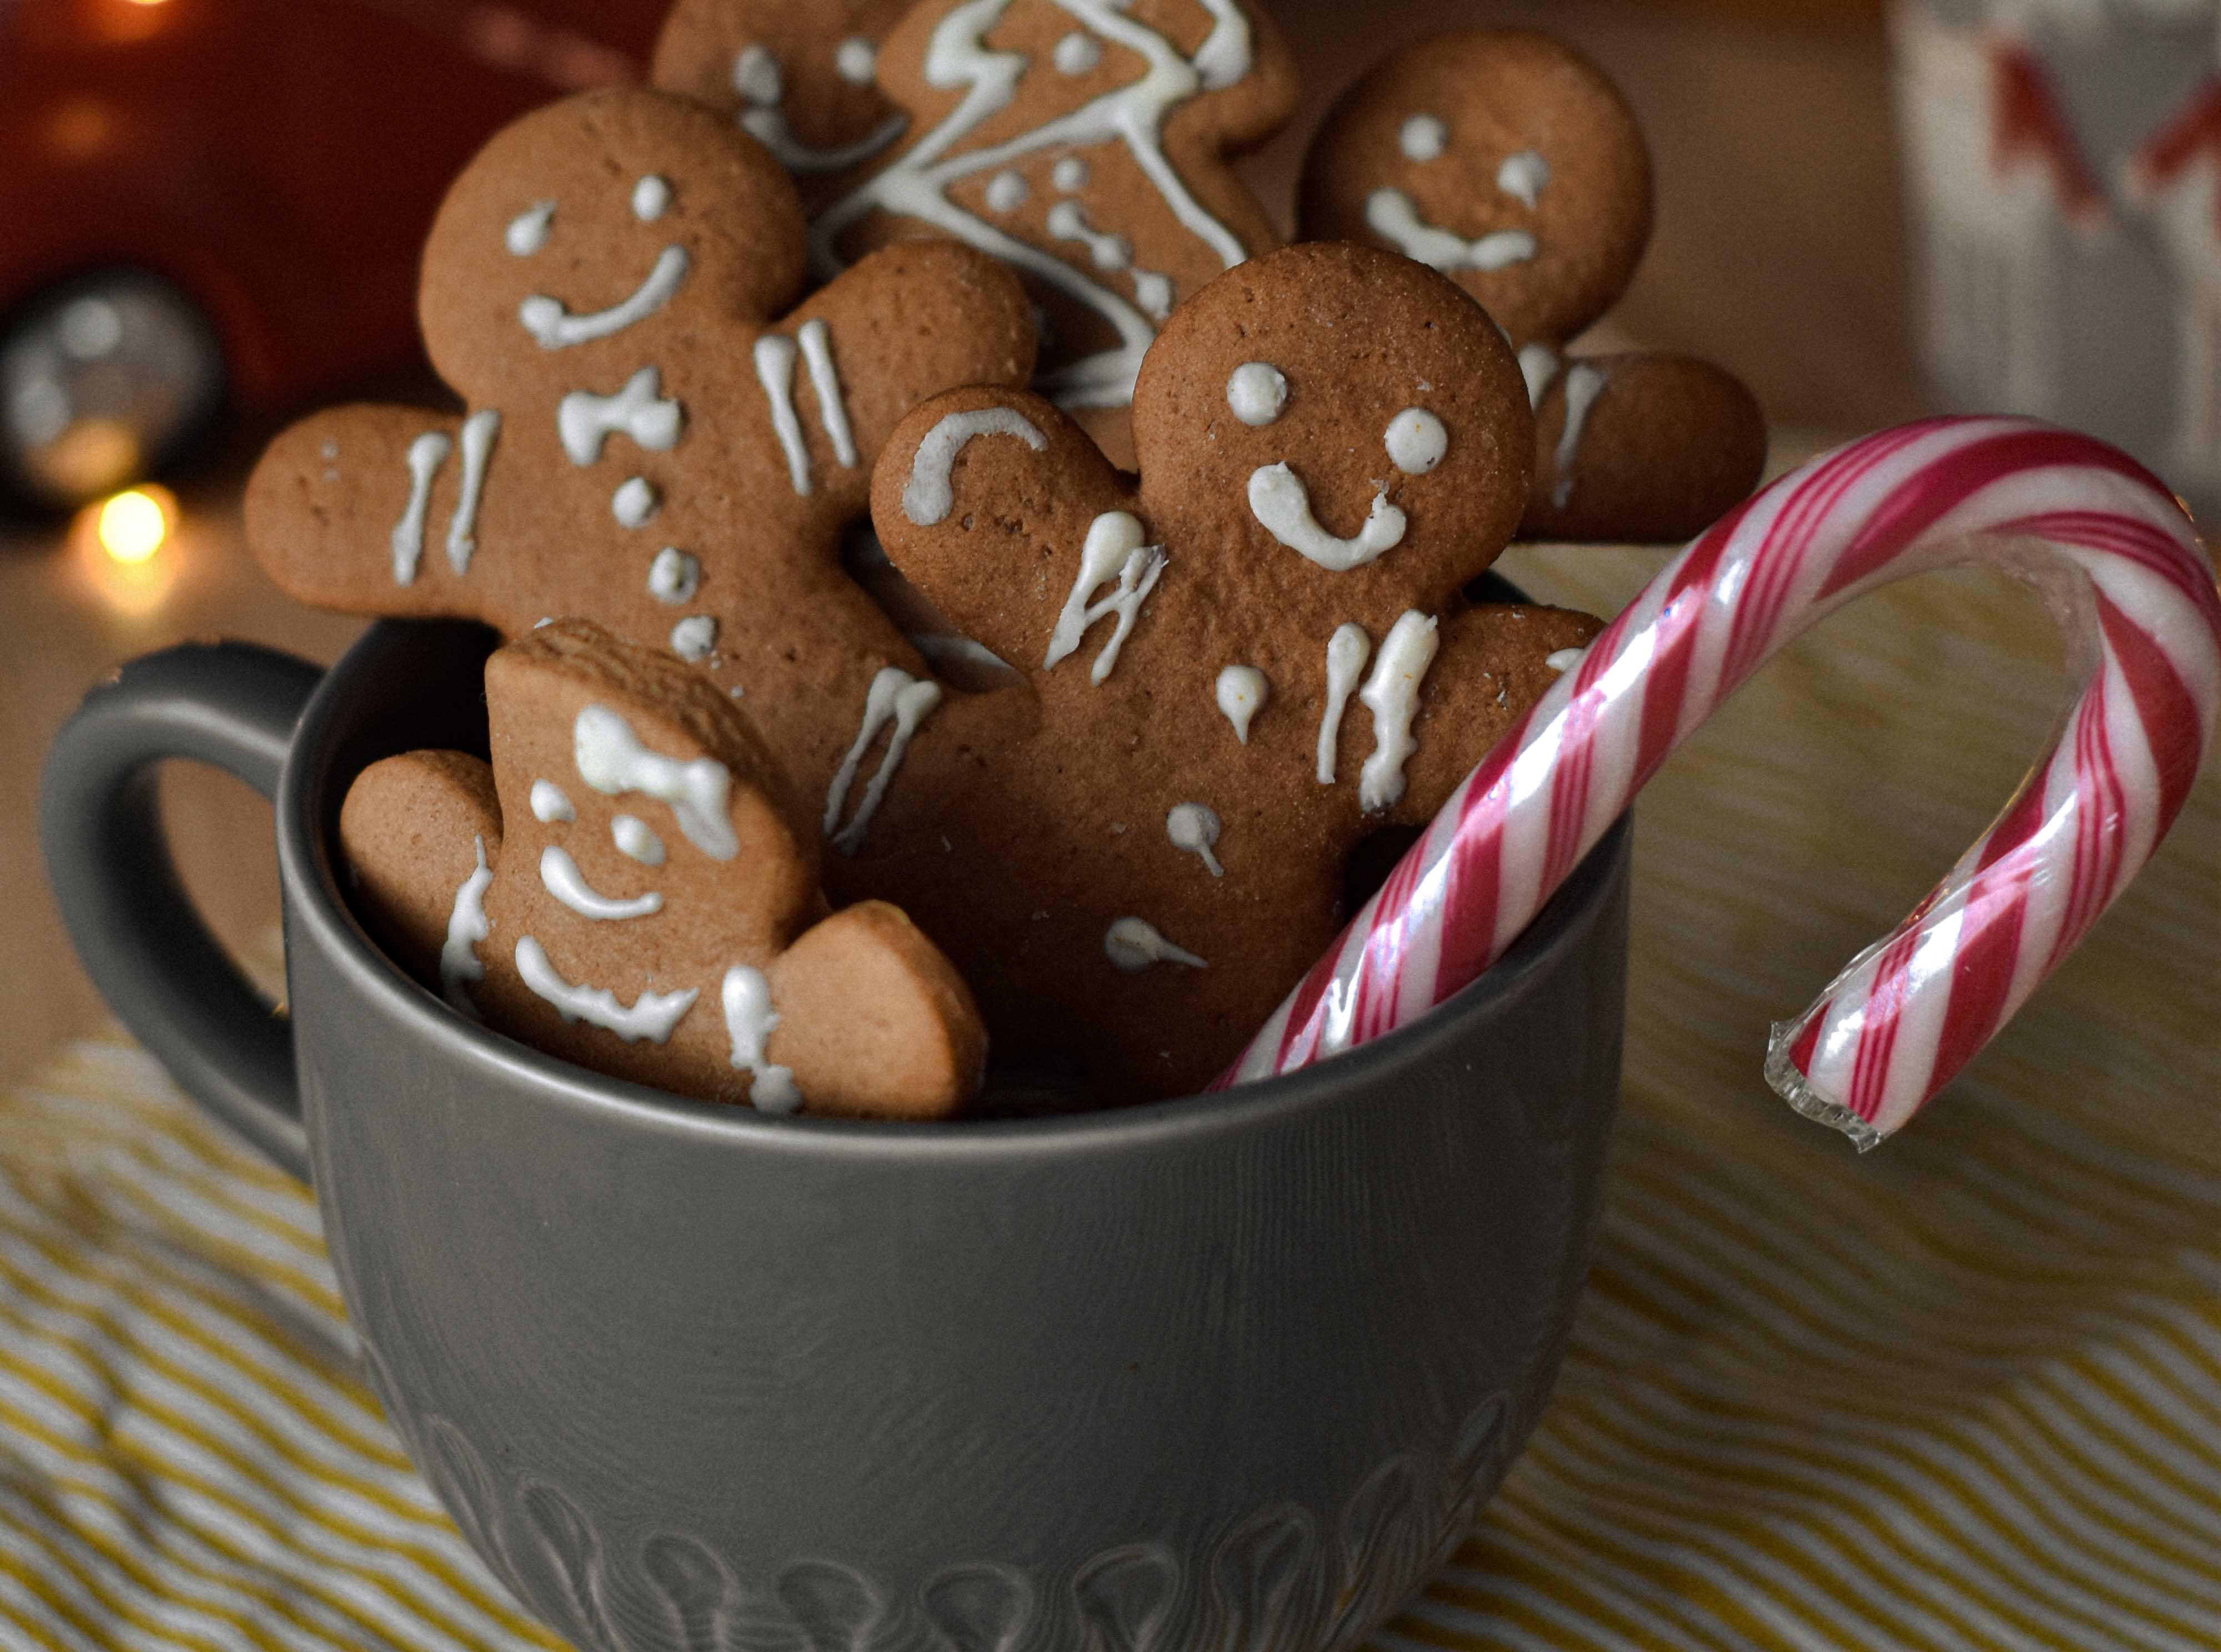 image Gingerbread: spices of holiday staple may have surprising health benefits